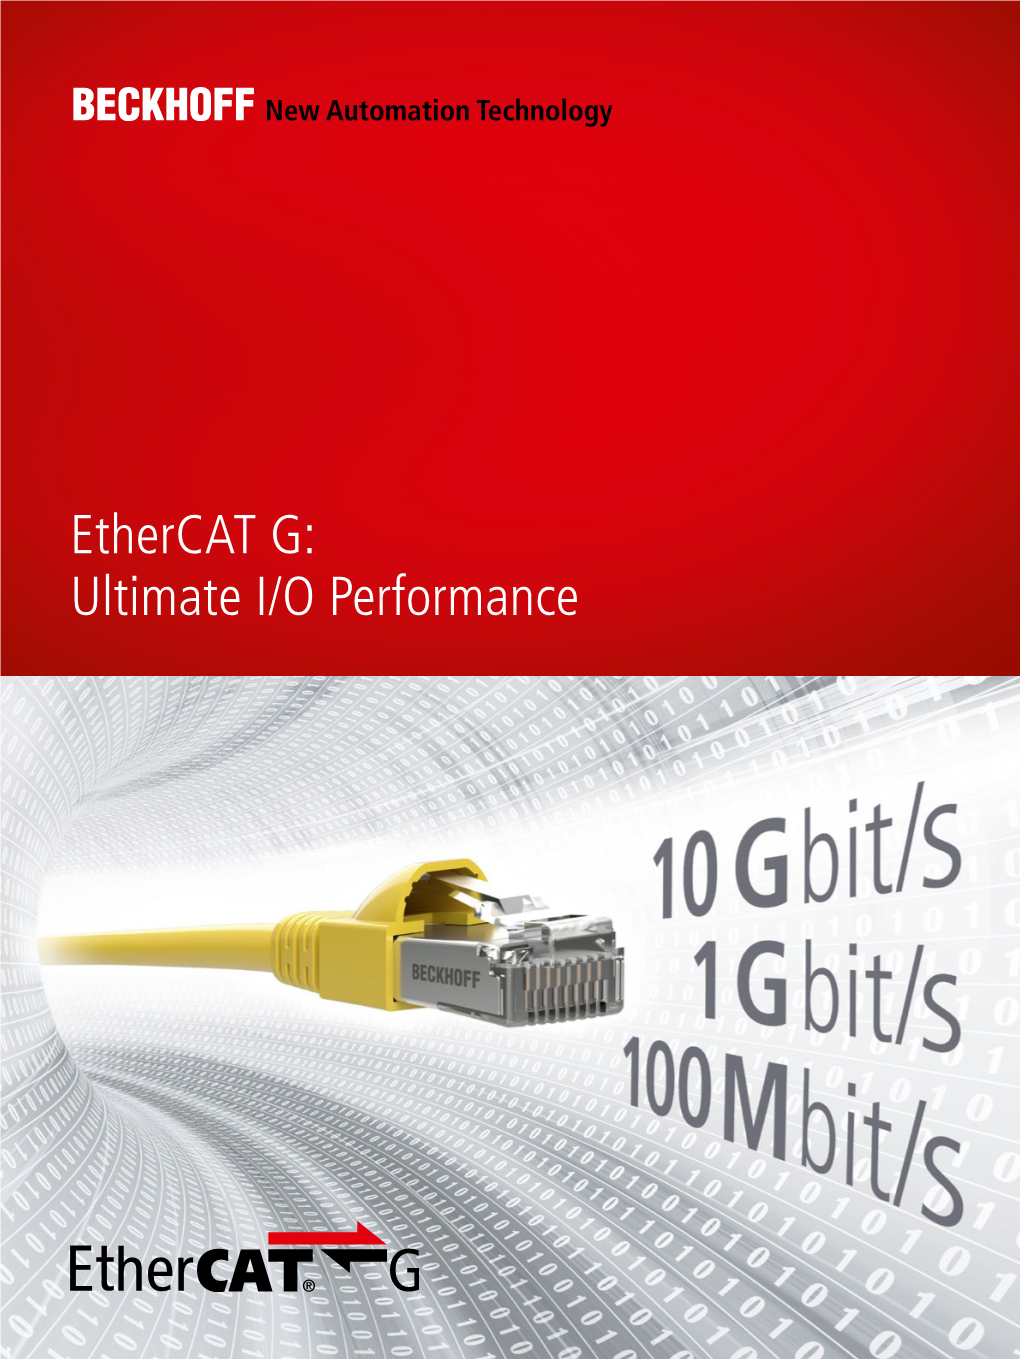 Ethercat G: Ultimate I/O Performance “With Ethercat G We Want to Help Customers Build the Best, Highest-Performing Machinery in the World”